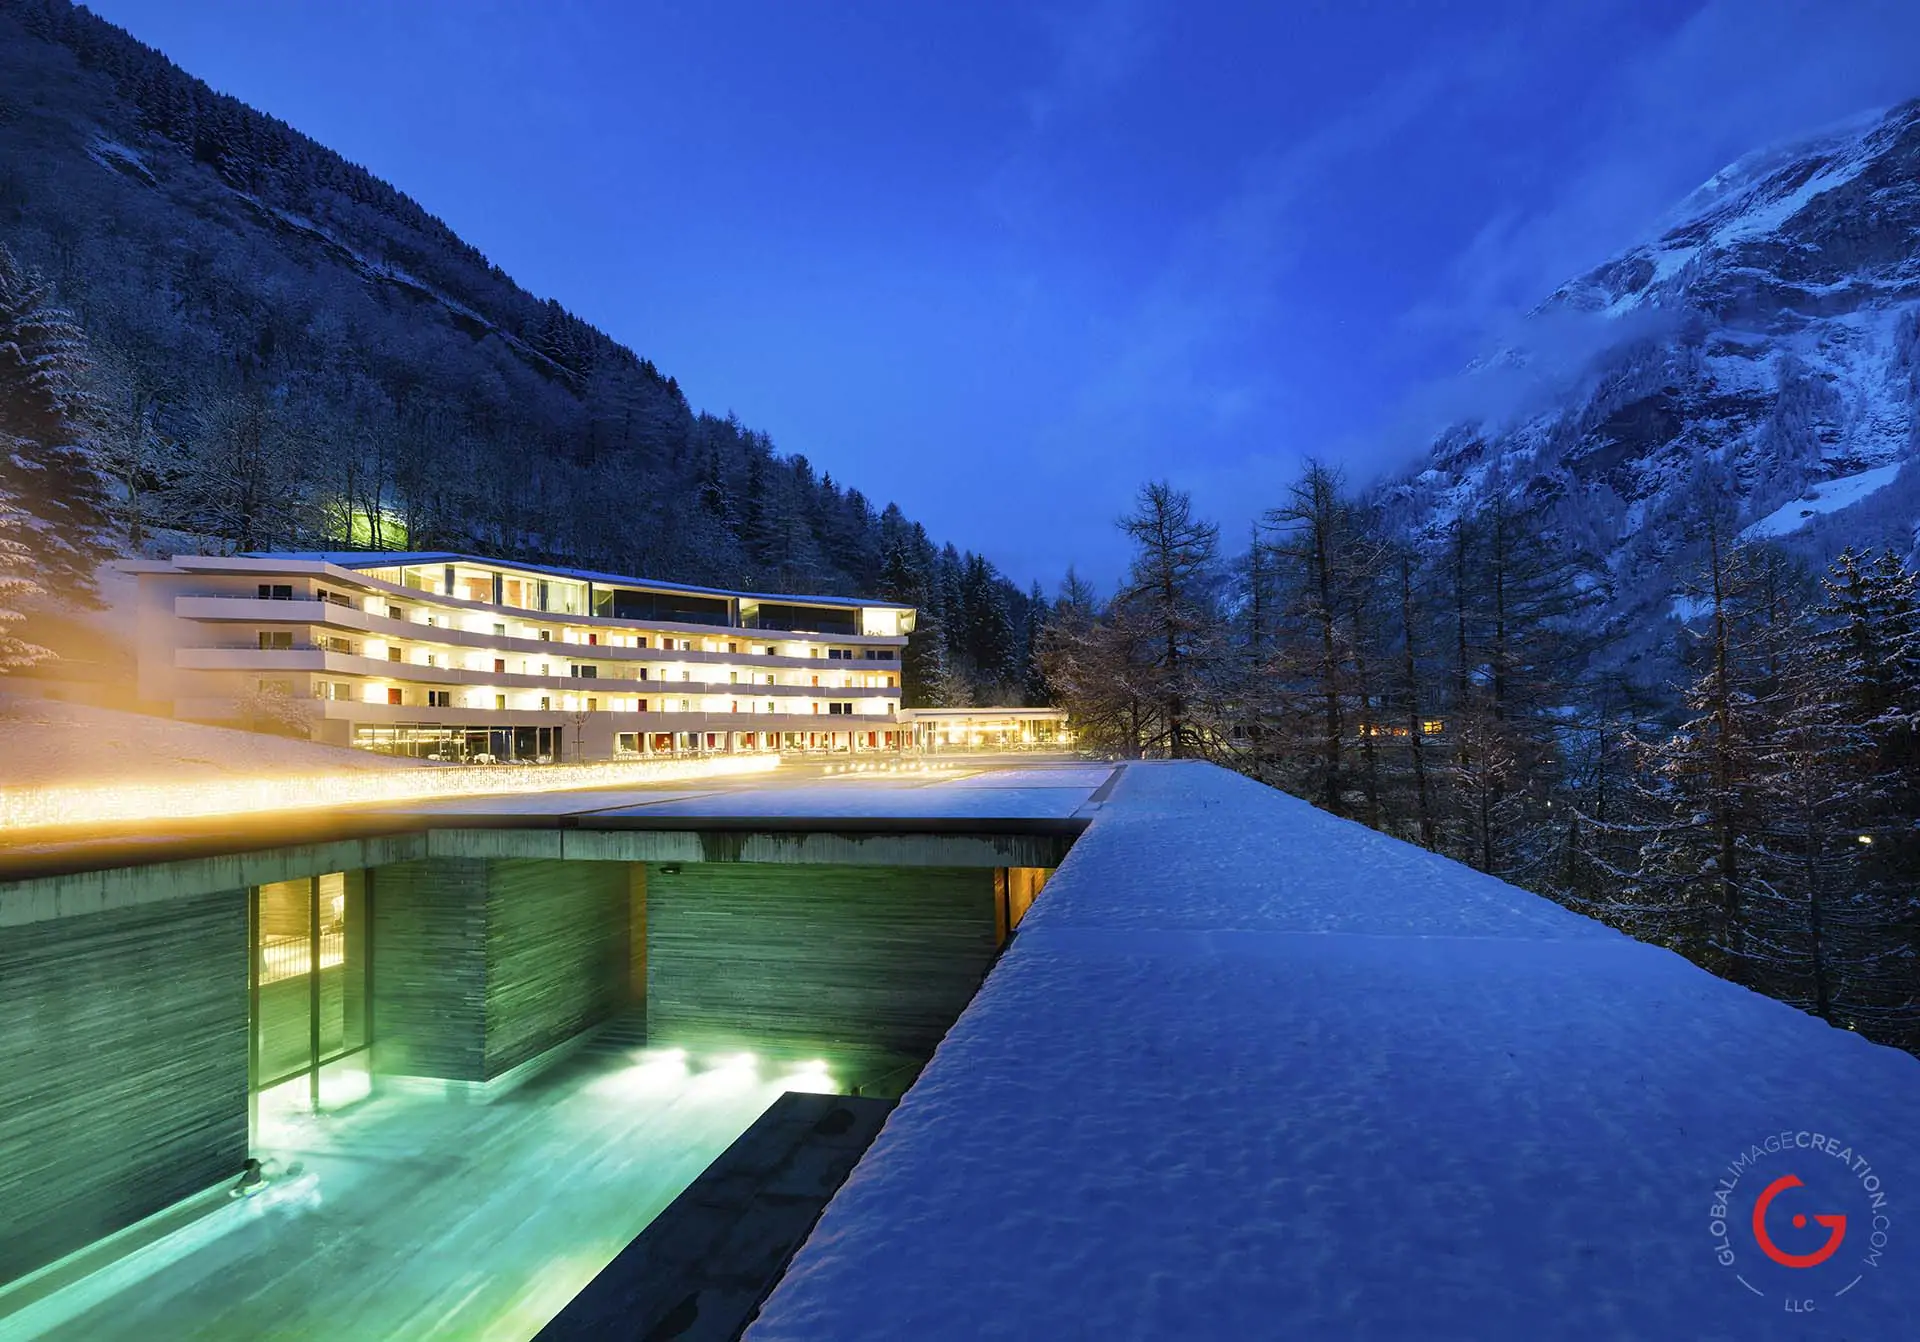 7132 Hotel and Therme in Vals, Switzerland -Professional Architecture Photographer and Commercial Photography of Buildings